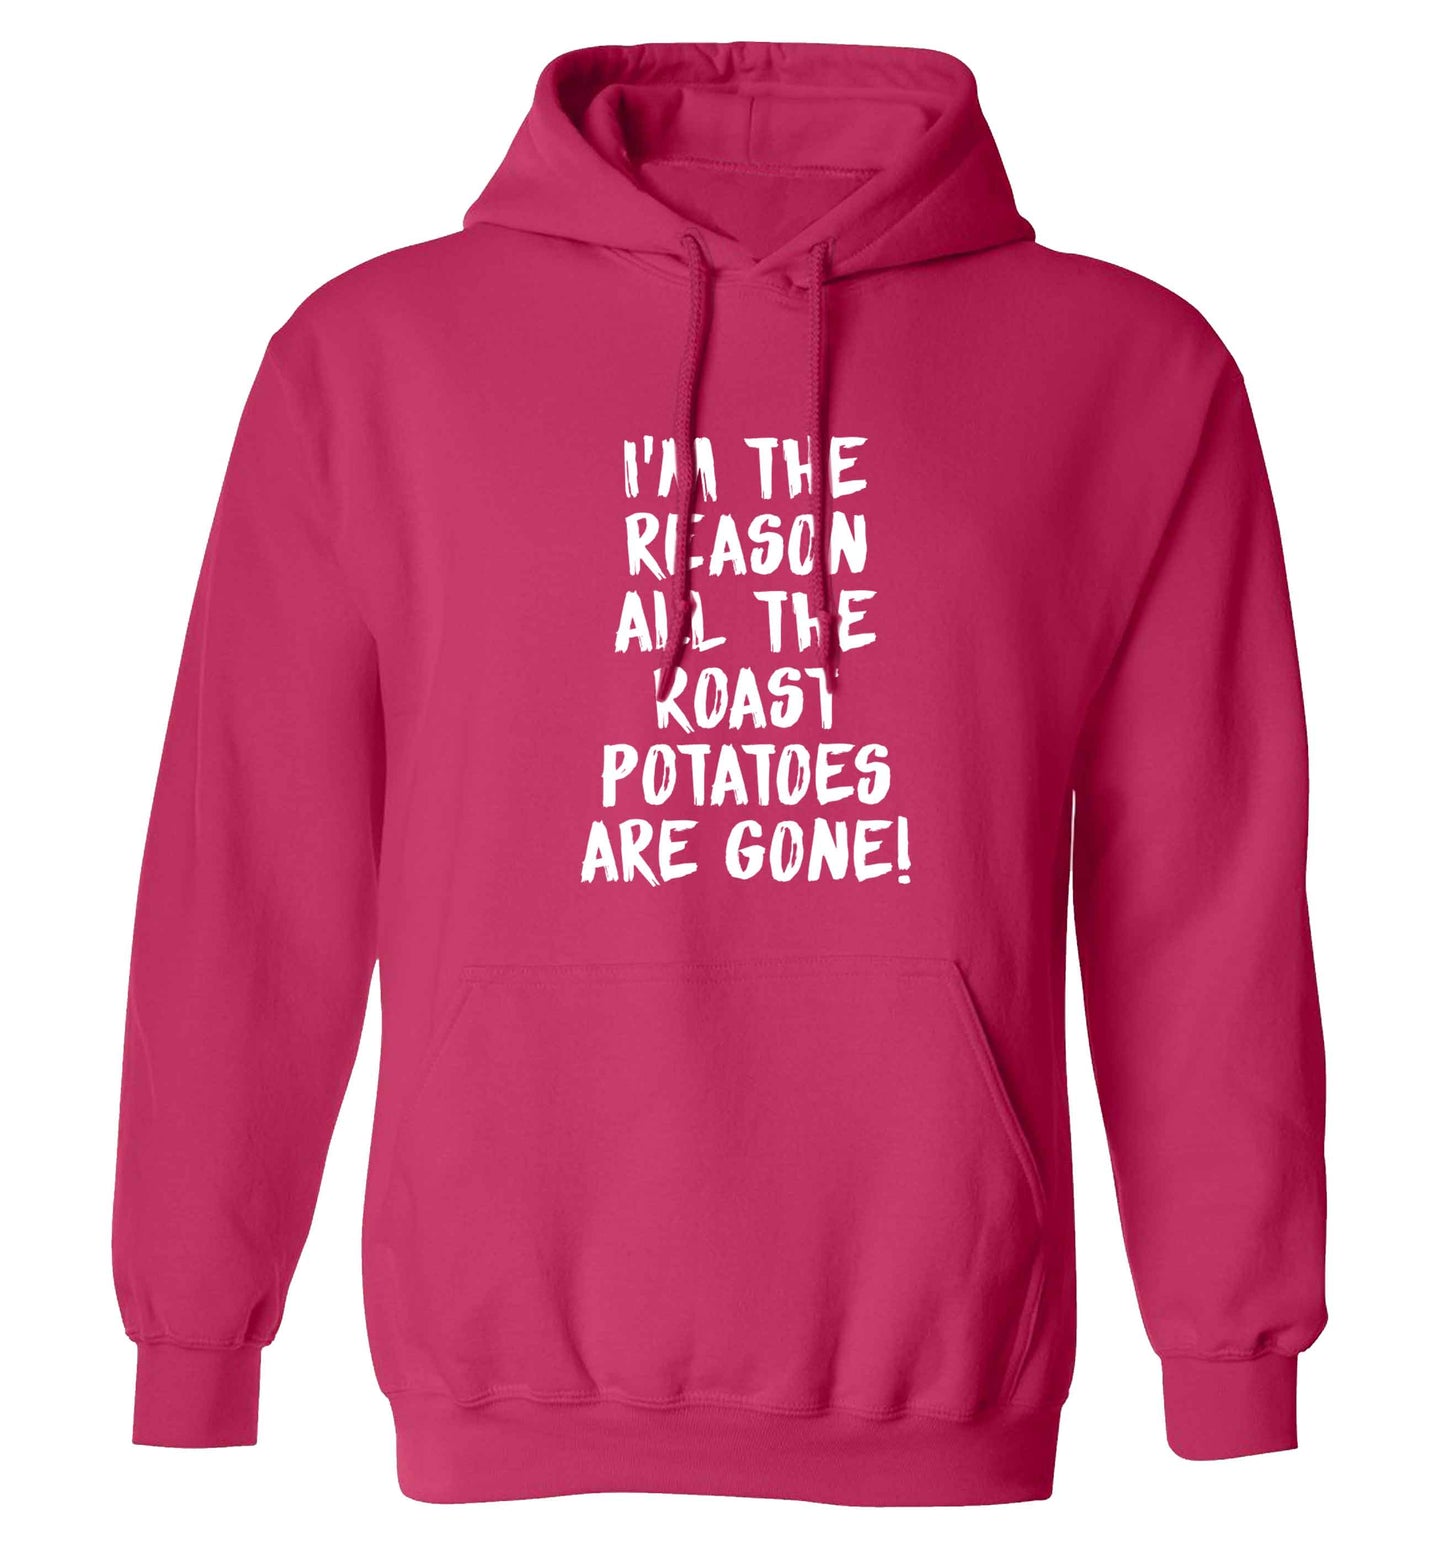 I'm the reason all the roast potatoes are gone adults unisex pink hoodie 2XL